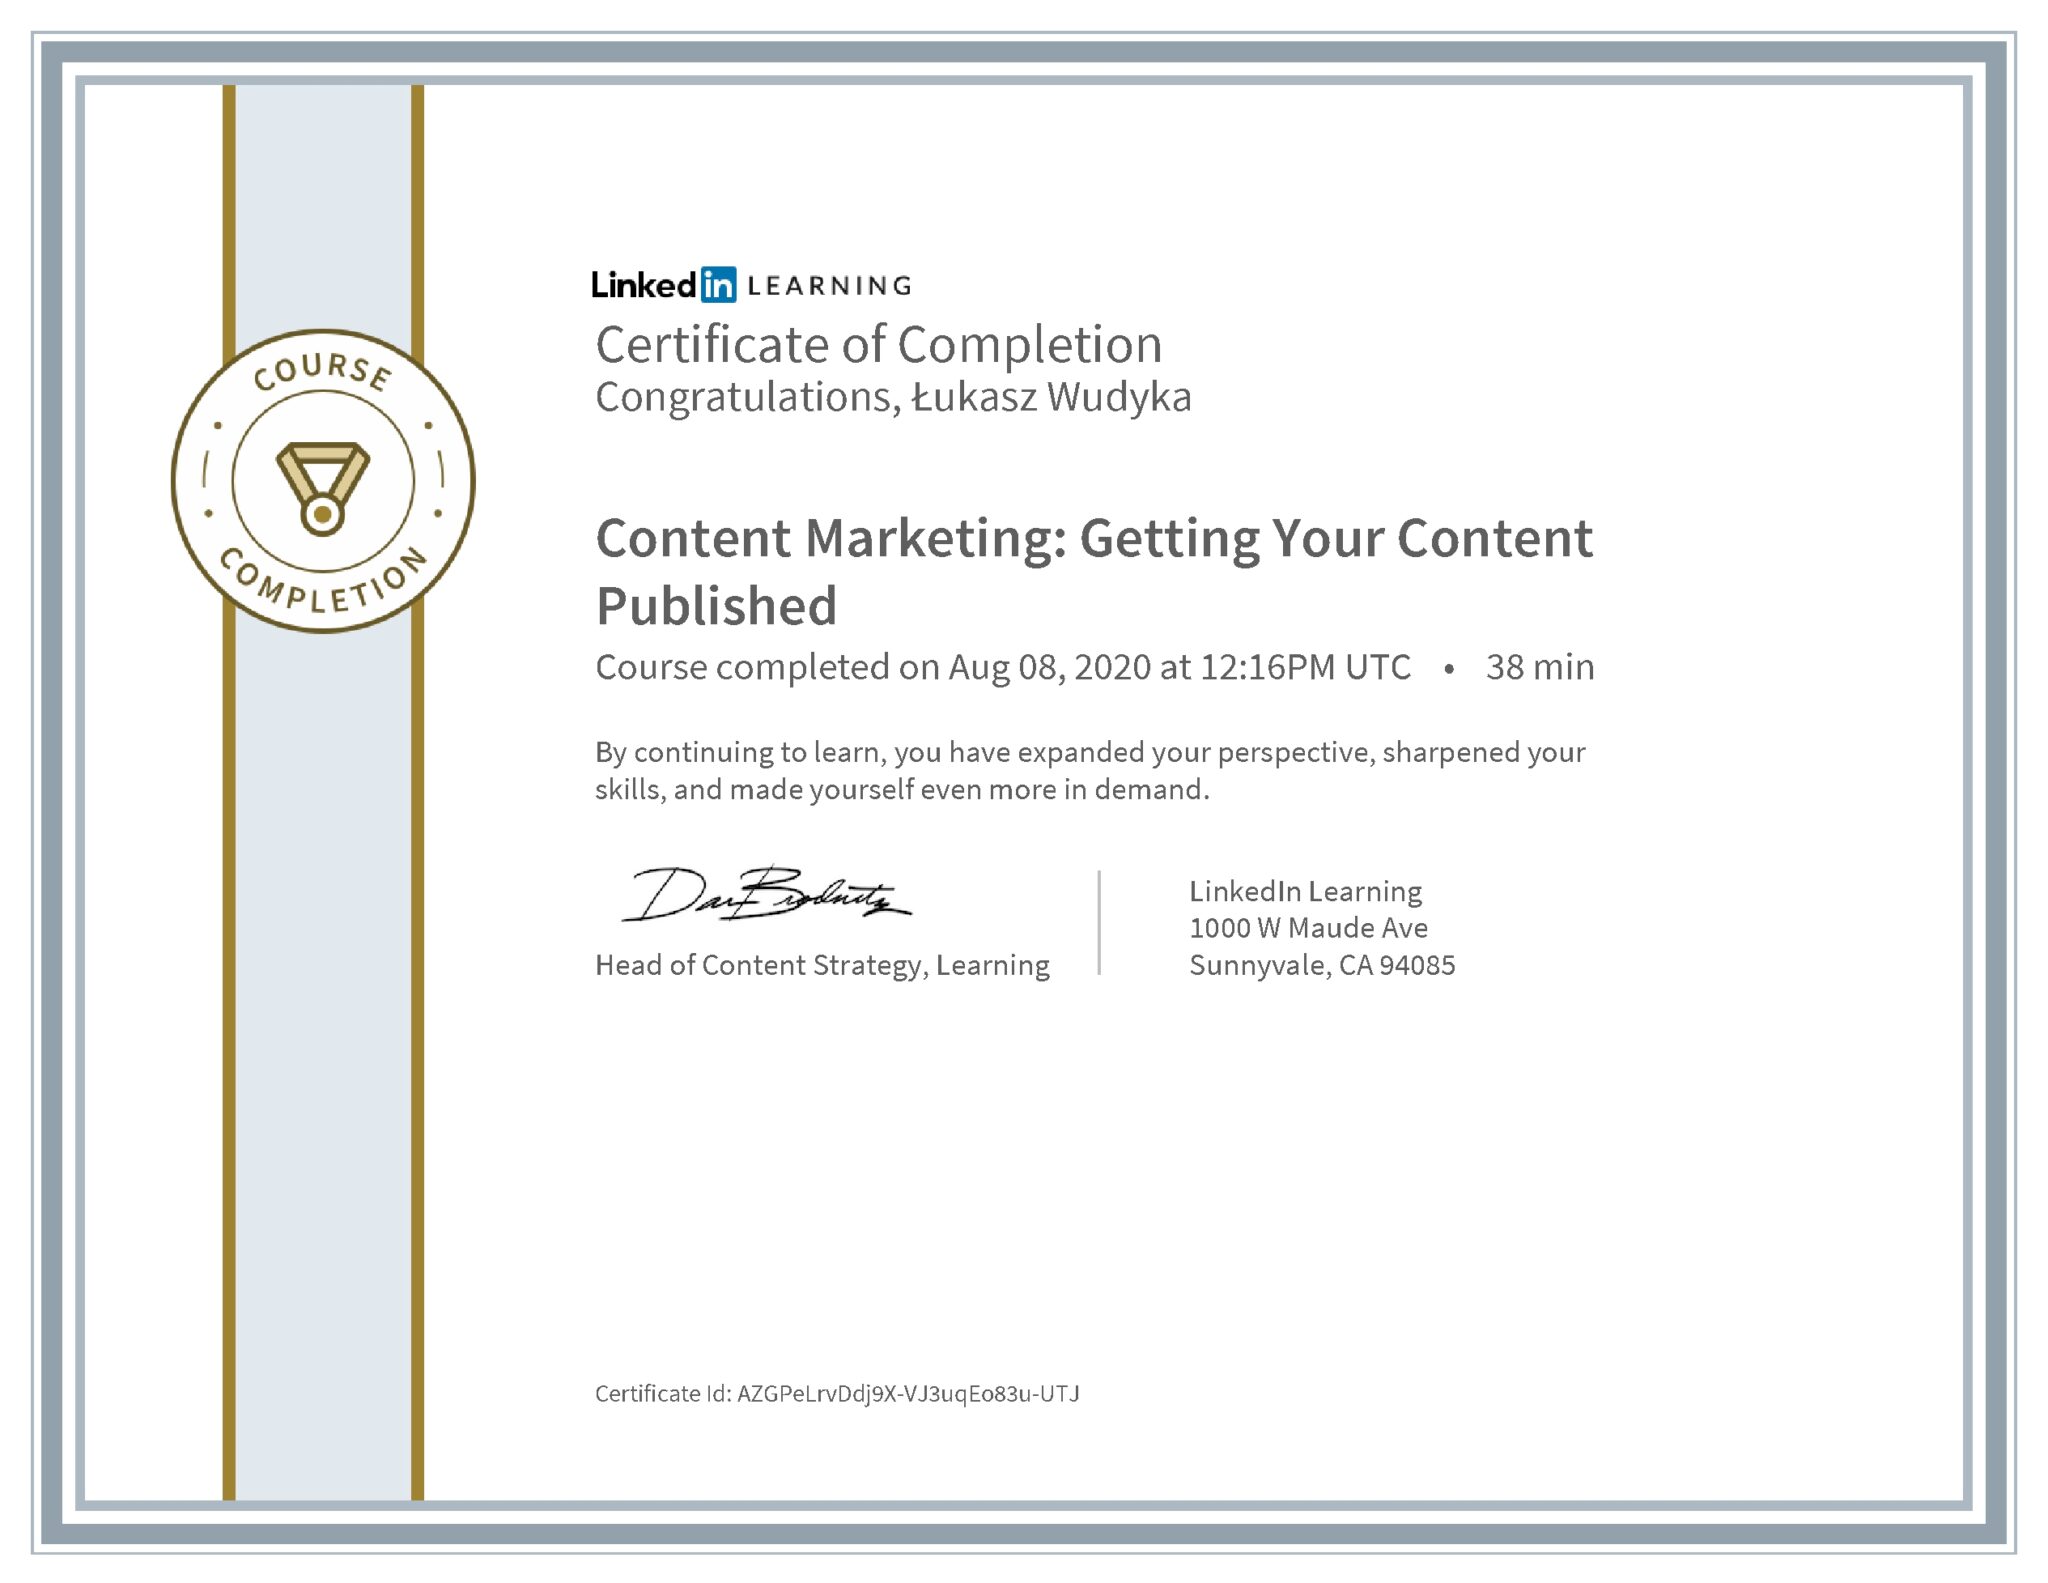 Łukasz Wudyka certyfikat LinkedIn Content Marketing: Getting Your Content Published